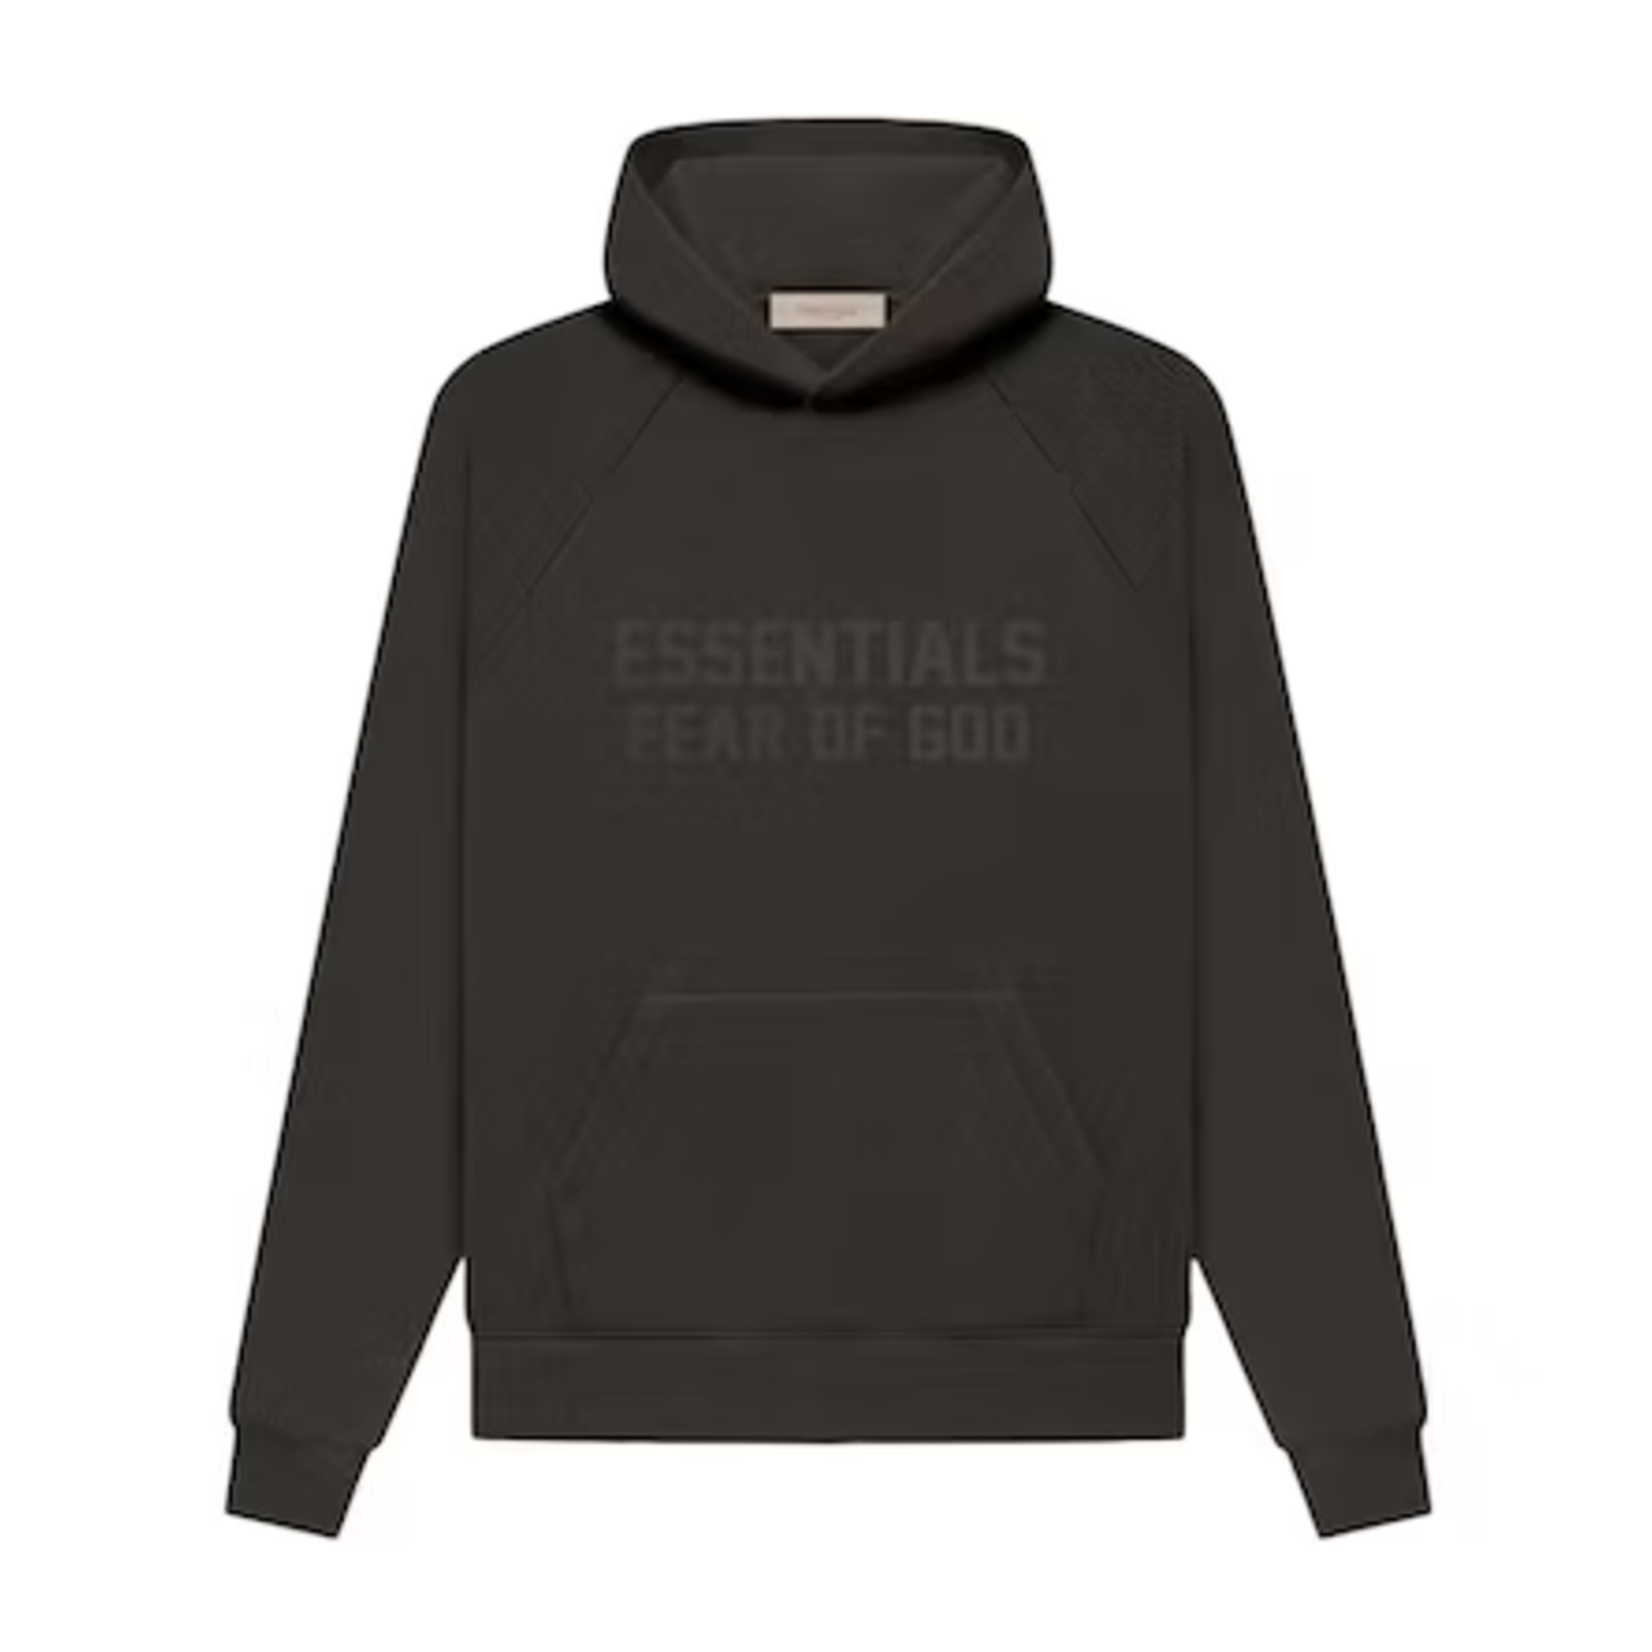 Fear Fear Of God Essentials Hoodie Off Black Size XSmall, DS BRAND NEW